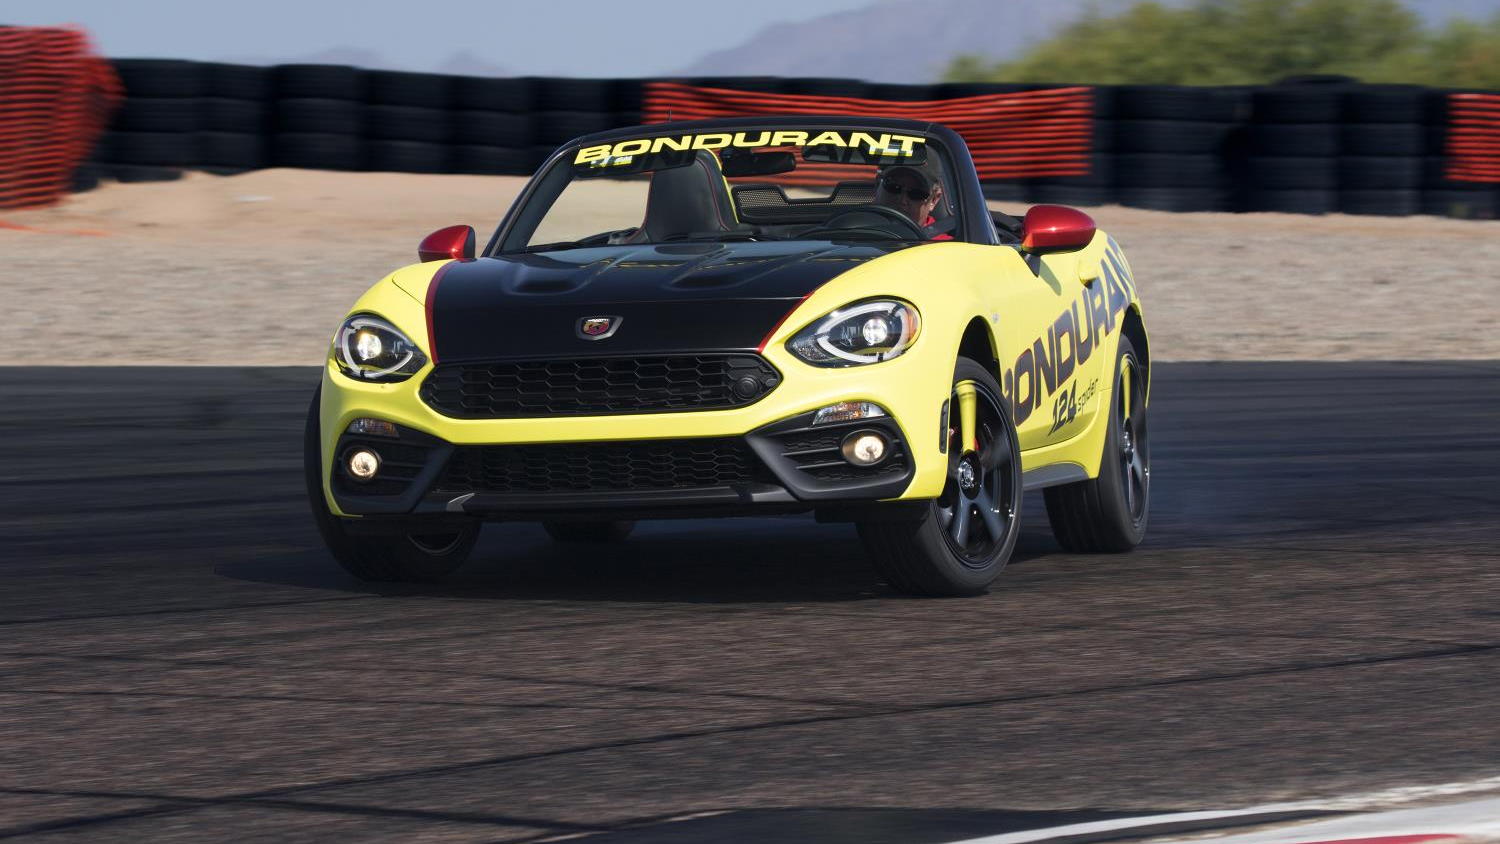 Fiat 124 Spider Abarth joins Bondurant for new Abarth Track Experience